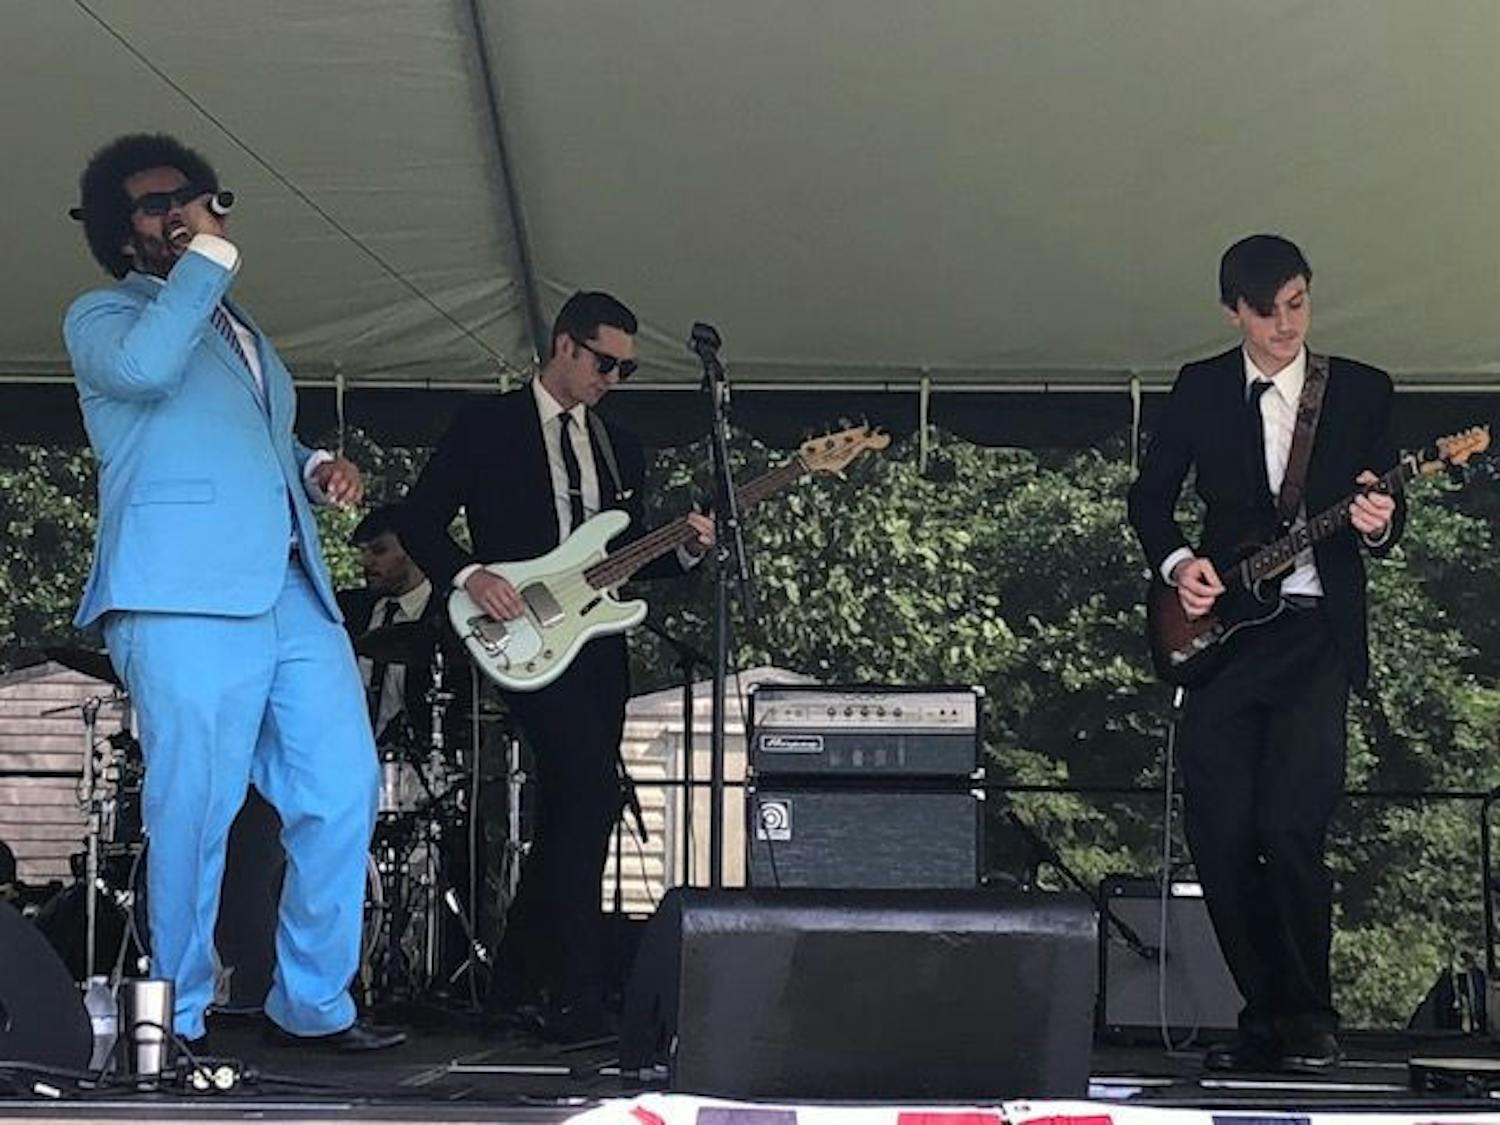 UF student Matt Fowler plays guitar with the Savants of Soul on stage in the field.
&nbsp;